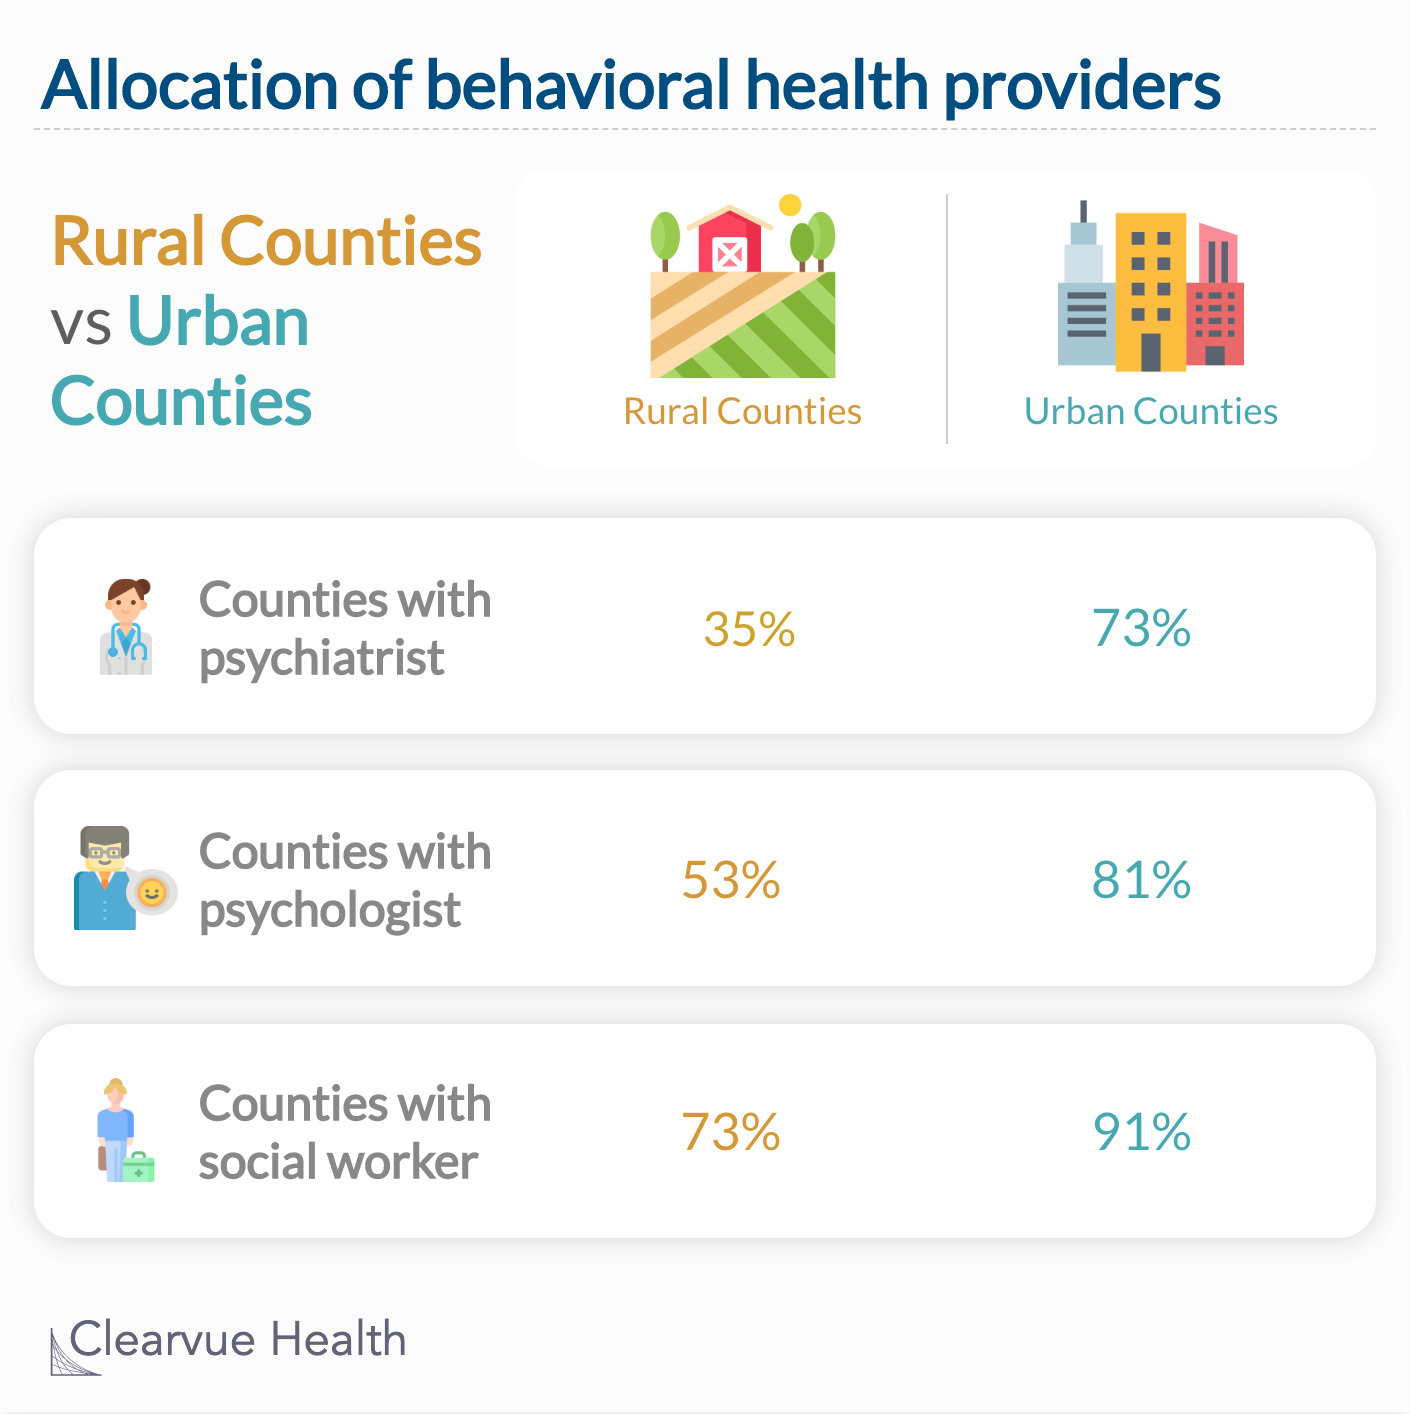 5% of rural counties do not have practicing psychiatrists and 47% do not have working psychologists